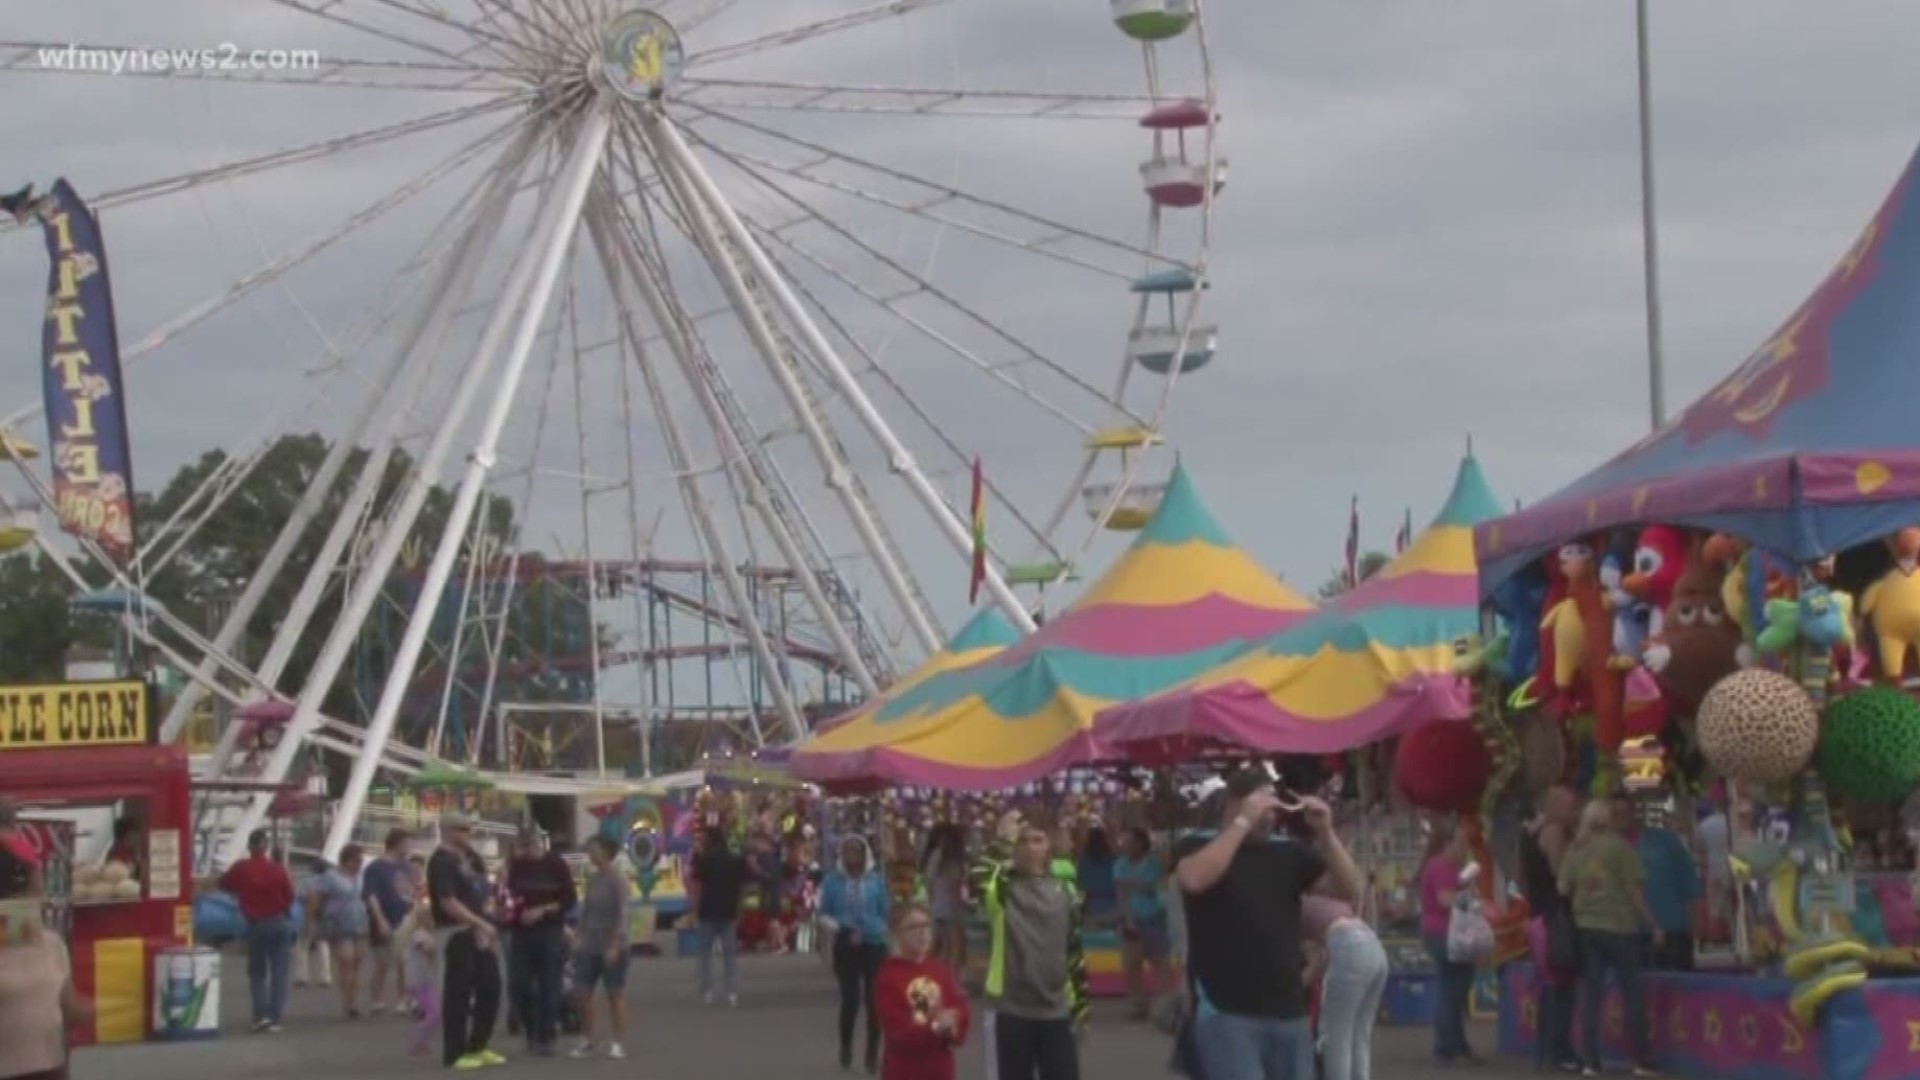 Winston-Salem city council approved the move to change the Dixie Classic Fair name.